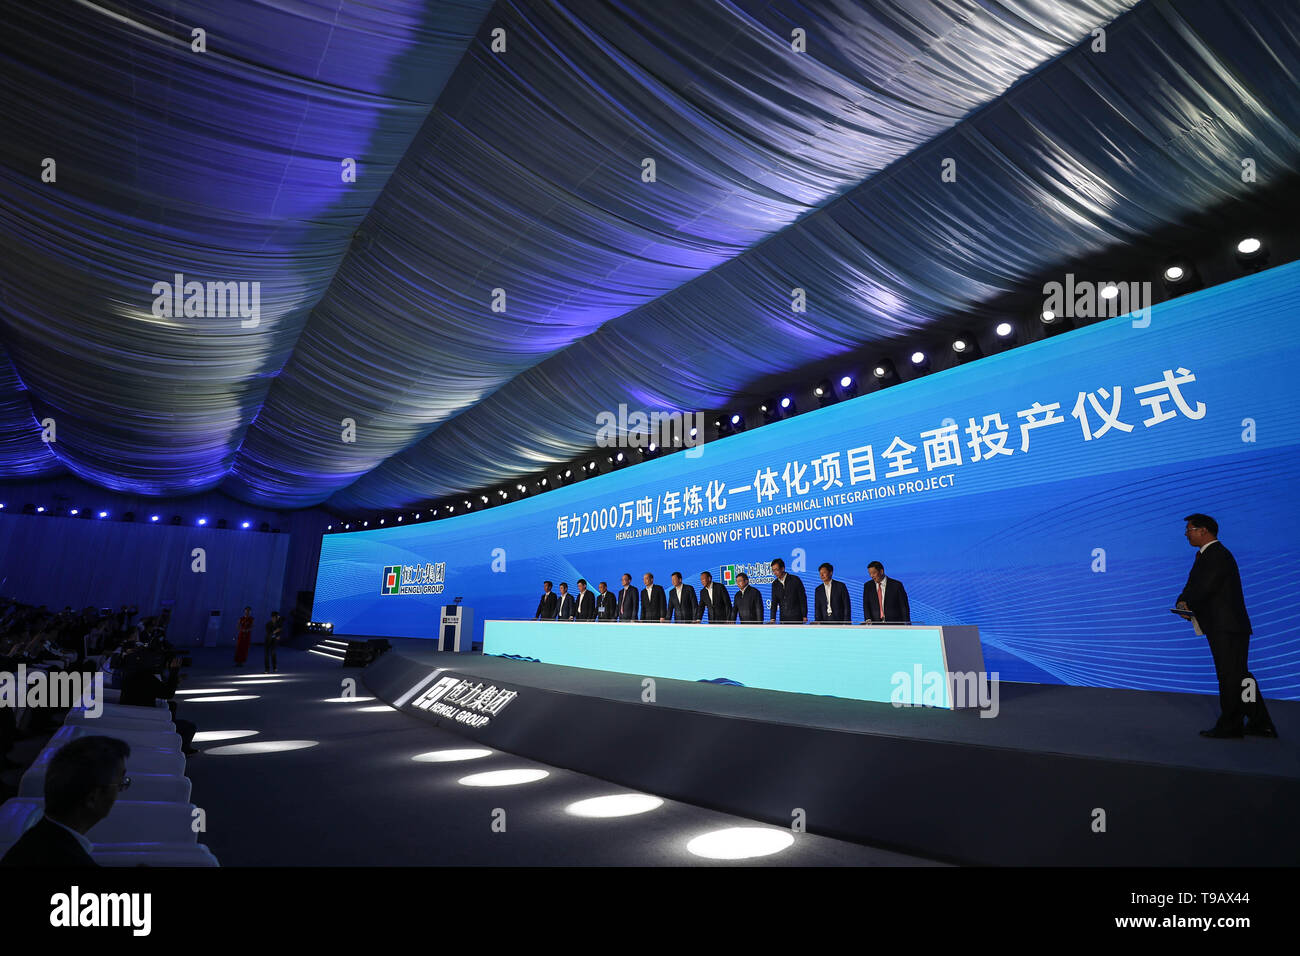 Dalian. 17th May, 2019. Photo taken on May 17, 2019 shows the ceremony of full operation of the Hengli 20 million tonnes per year refining and chemical integration project held on the Changxing Island in Dalian City, northeast China's Liaoning Province. The private-owned Hengli Petrochemical (Dalian) Refining Co., Ltd. achieved full operation in its 20 million tonnes per year refinery and chemical complex in Dalian, the company said Friday. Credit: Pan Yulong/Xinhua/Alamy Live News Stock Photo